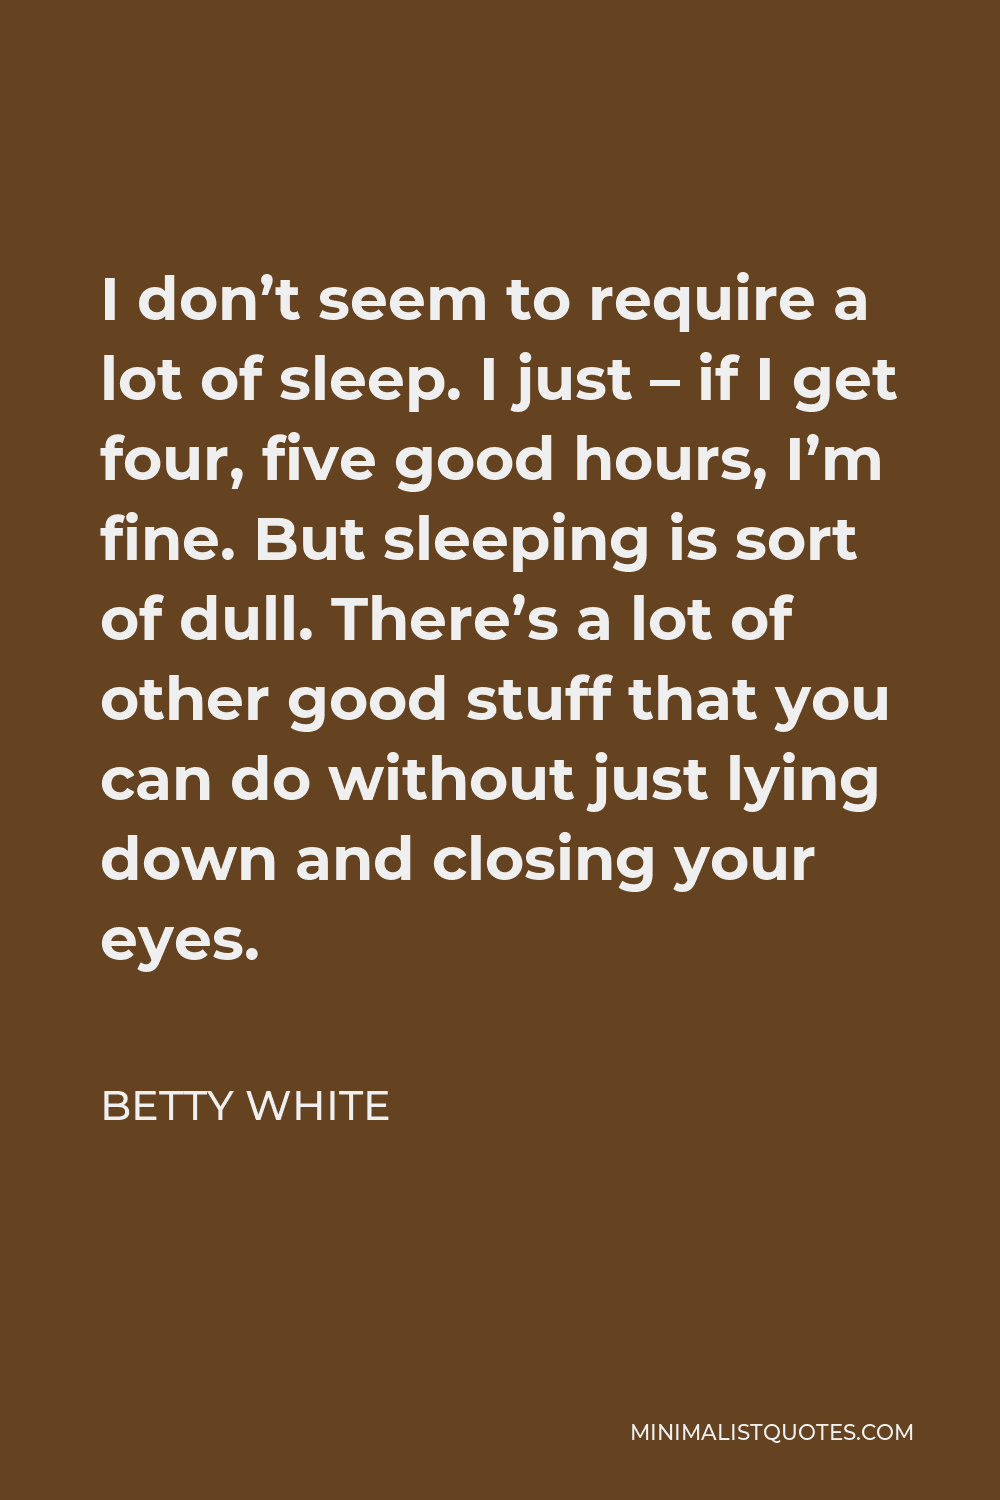 Betty White Quote - I don’t seem to require a lot of sleep. I just – if I get four, five good hours, I’m fine. But sleeping is sort of dull. There’s a lot of other good stuff that you can do without just lying down and closing your eyes.